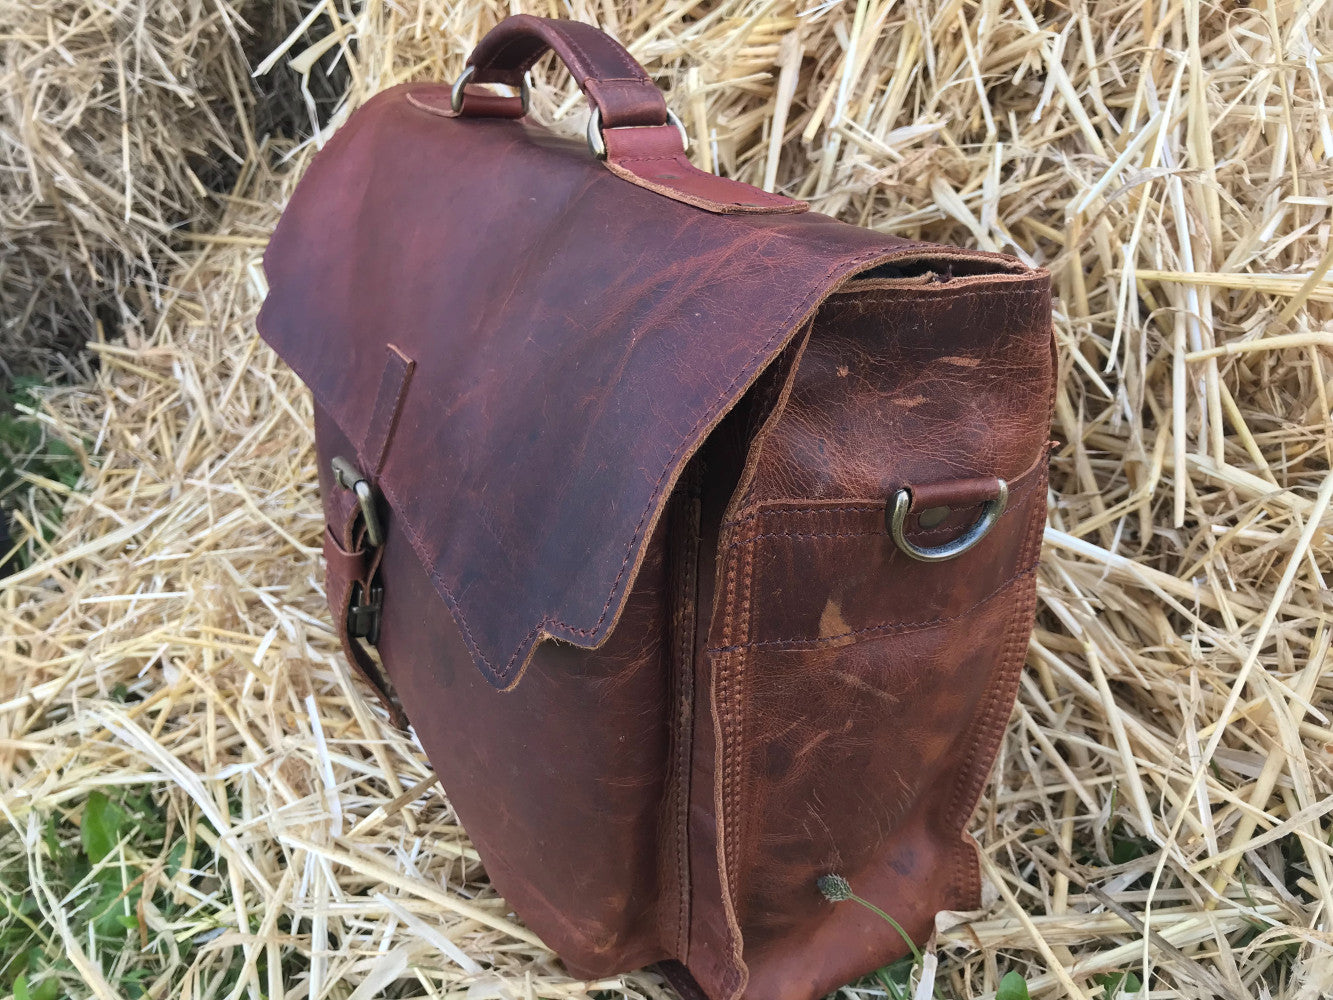 The Dorrington Briefcase. A classic 30's styled leather briefcase by Burghley Bags. A handmade leather vintage work bag, with enough space for 15" laptops. Comes with an adjustable and detachable shoulder strap. Shown in vintage brown.